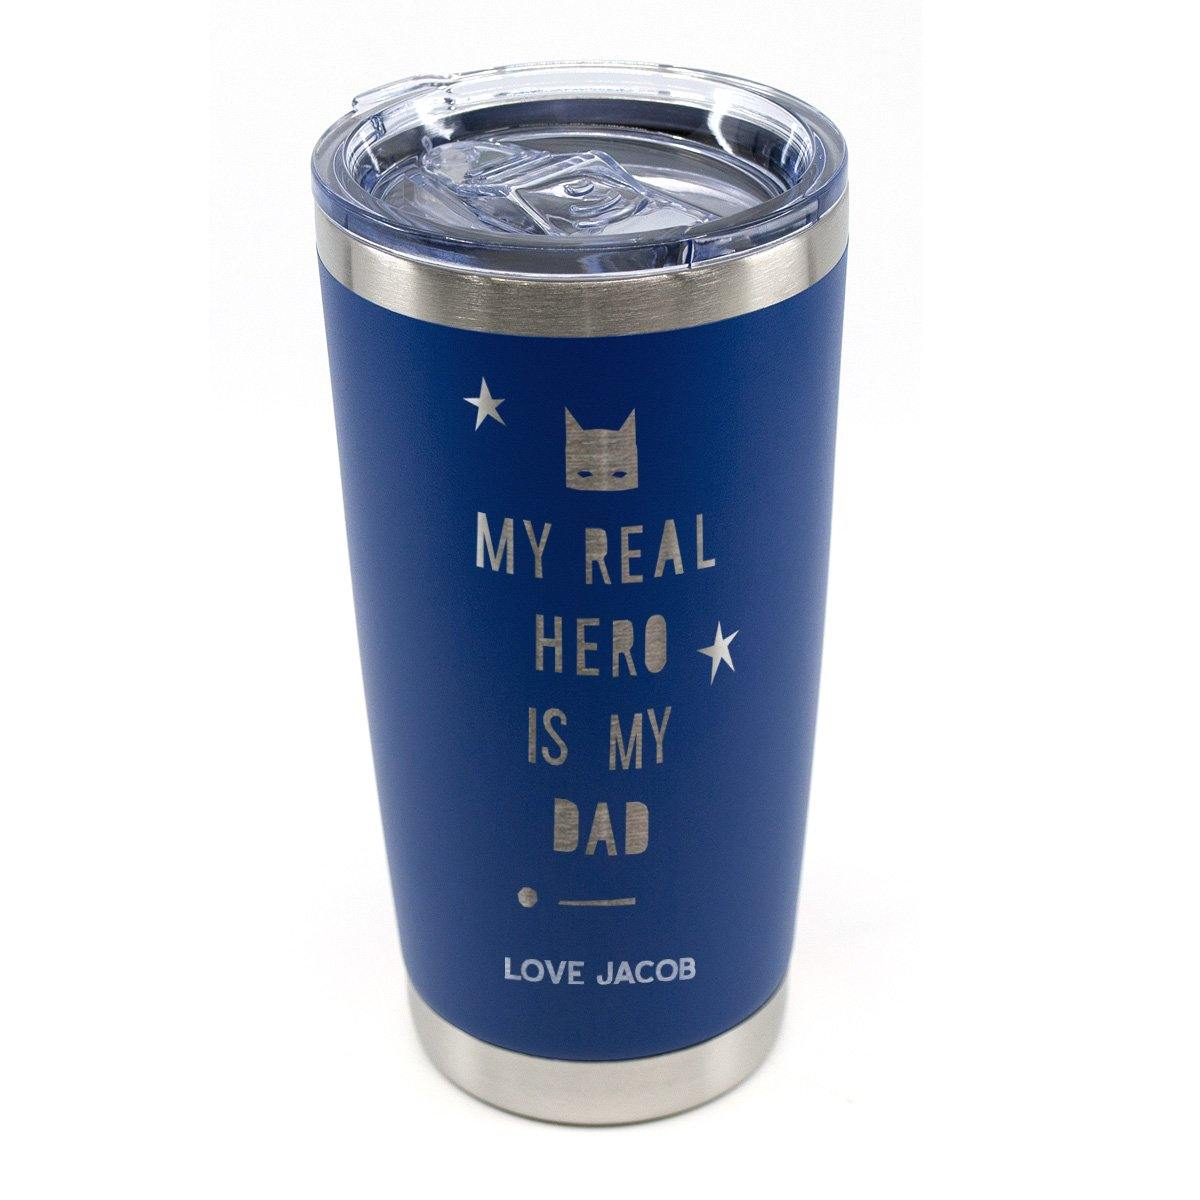 Father's Day Coffee Cup personalised engraved - Alexa Lane